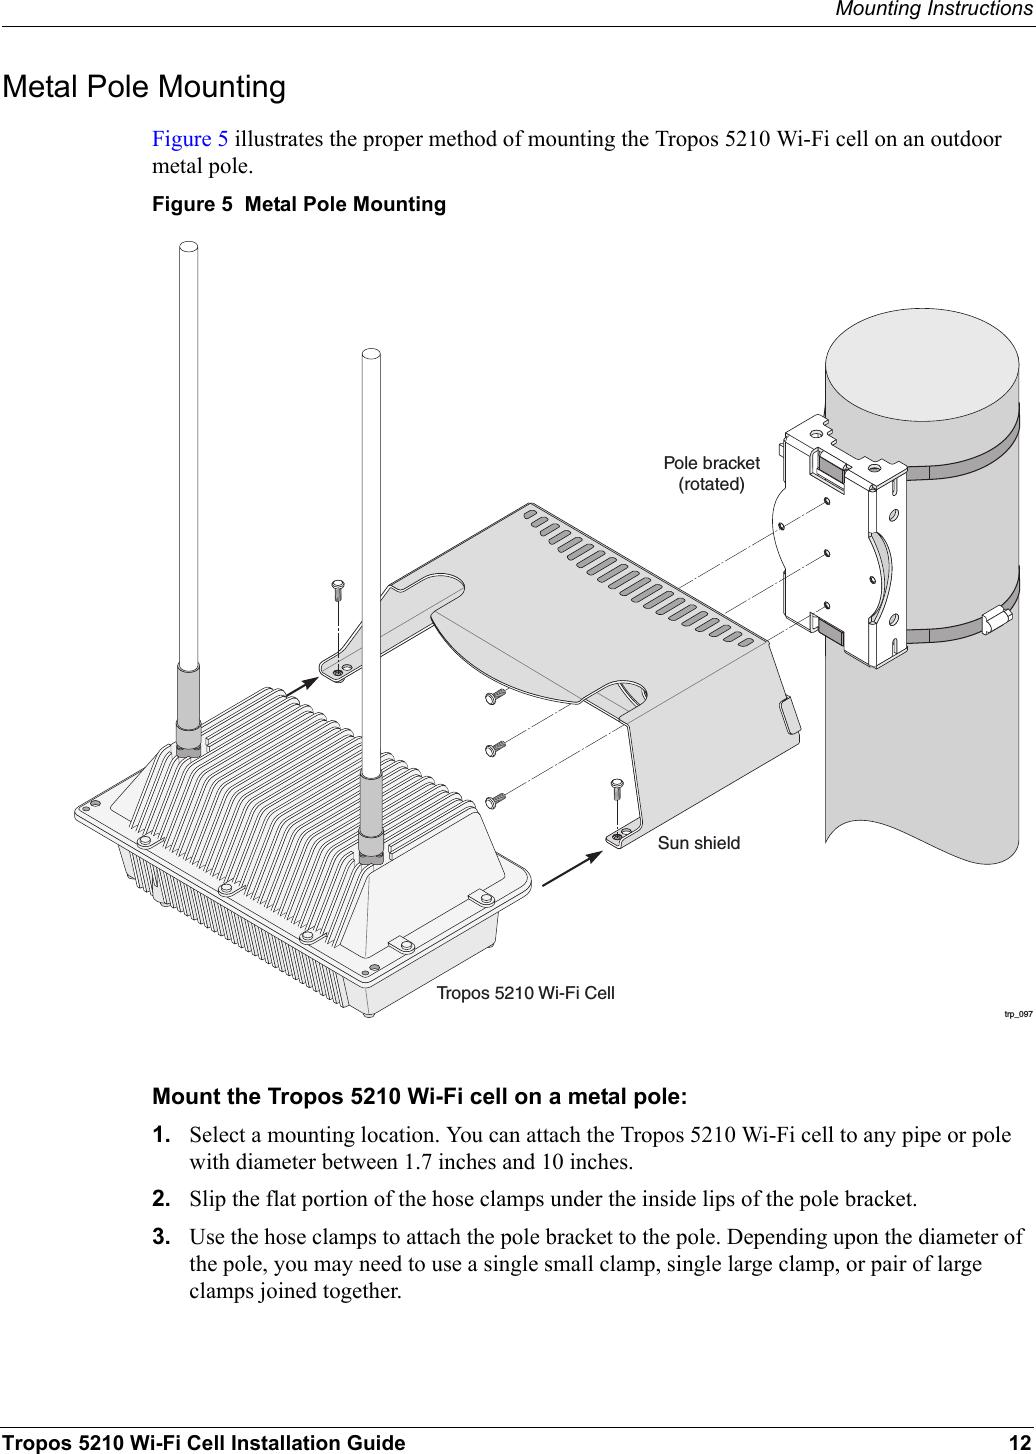 Mounting InstructionsTropos 5210 Wi-Fi Cell Installation Guide 12Metal Pole MountingFigure 5 illustrates the proper method of mounting the Tropos 5210 Wi-Fi cell on an outdoor metal pole. Figure 5  Metal Pole MountingMount the Tropos 5210 Wi-Fi cell on a metal pole:1. Select a mounting location. You can attach the Tropos 5210 Wi-Fi cell to any pipe or pole with diameter between 1.7 inches and 10 inches.2. Slip the flat portion of the hose clamps under the inside lips of the pole bracket. 3. Use the hose clamps to attach the pole bracket to the pole. Depending upon the diameter of the pole, you may need to use a single small clamp, single large clamp, or pair of large clamps joined together.trp_097Pole bracket(rotated)Tropos 5210 Wi-Fi CellSun shield